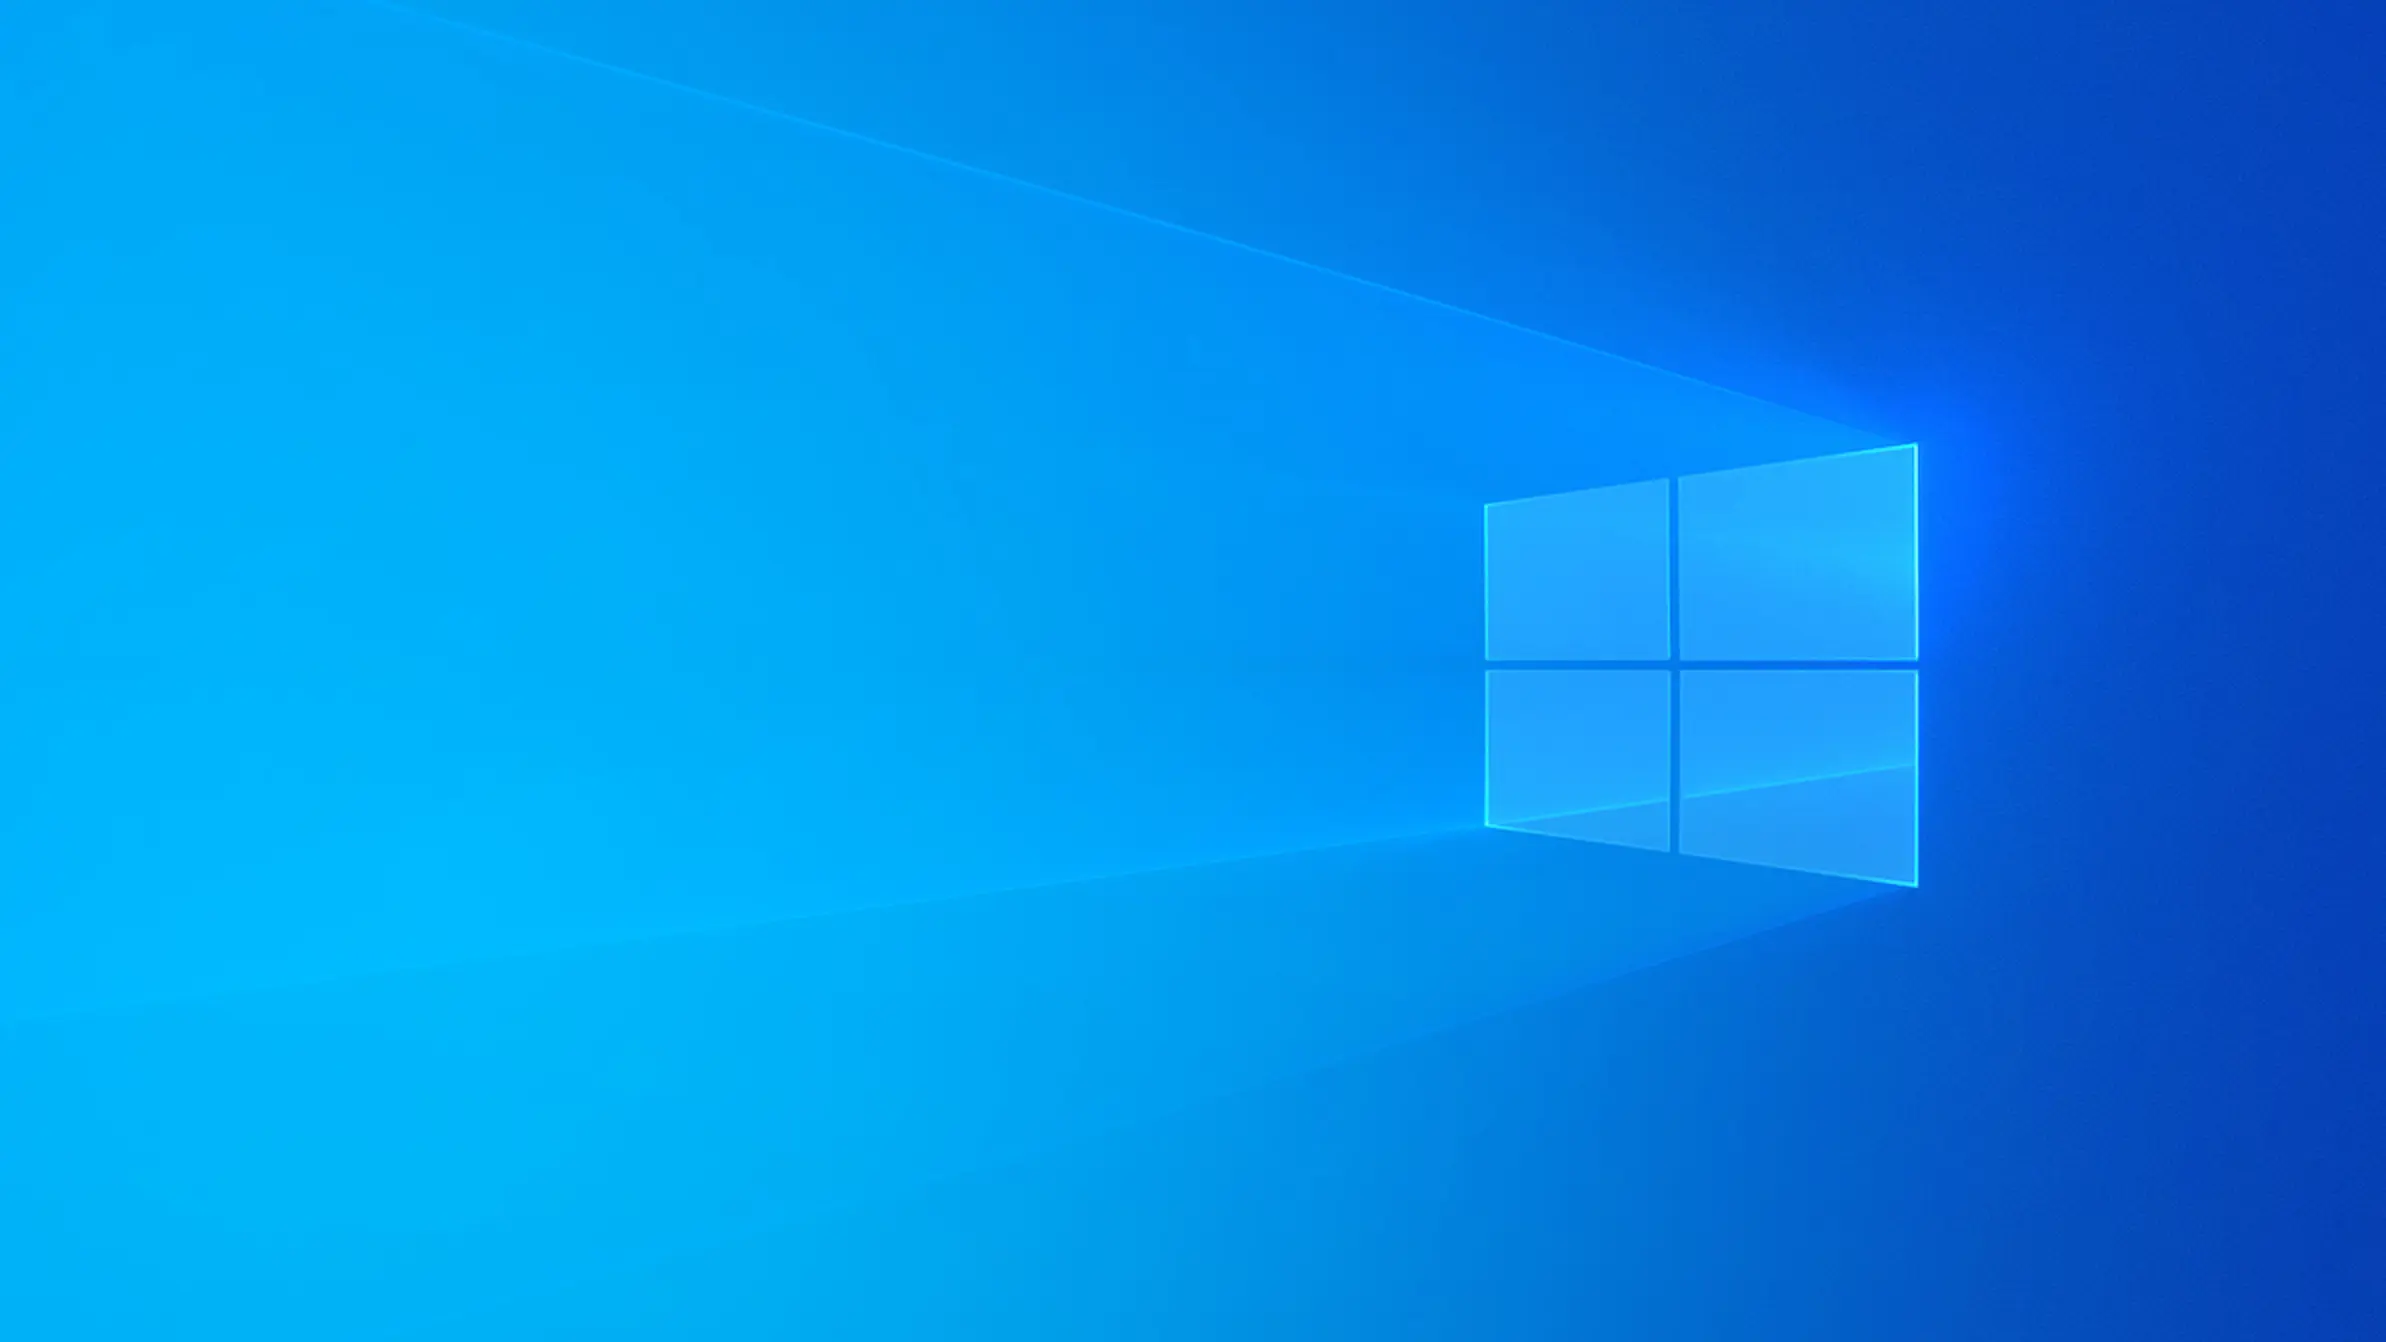 How to Install Windows 10 on New Pc Without Operating System?